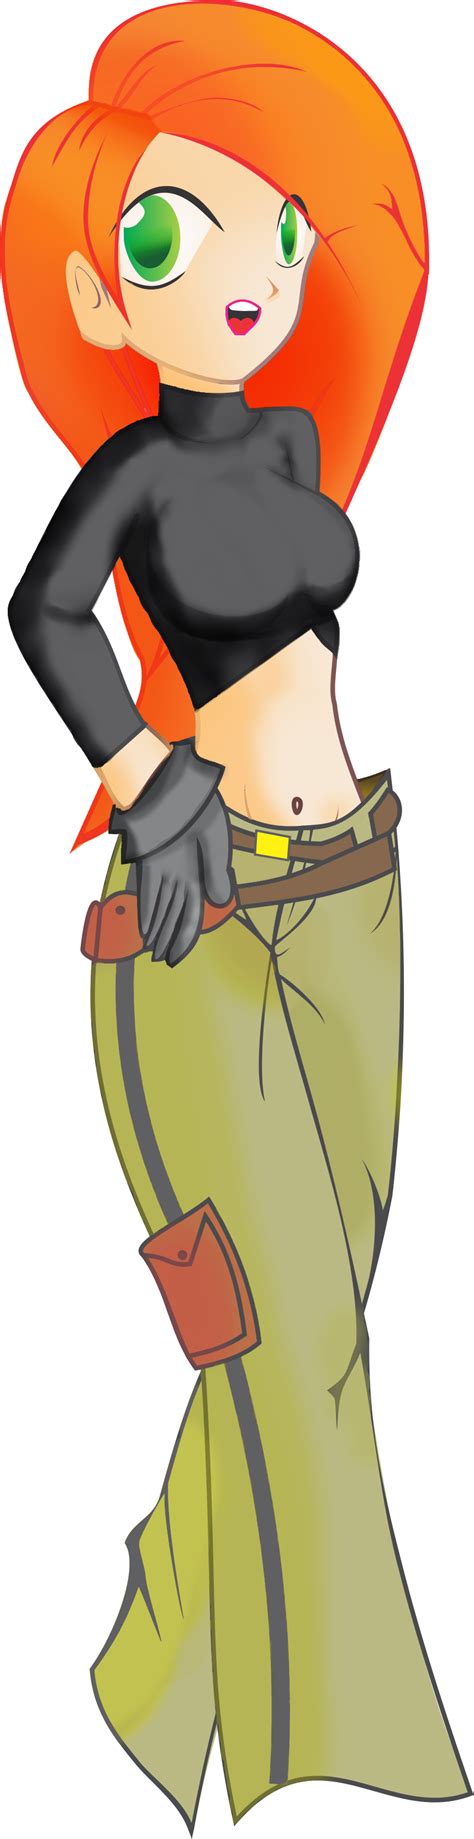 Kim Possible Anime Style By Damr1990 On Deviantart